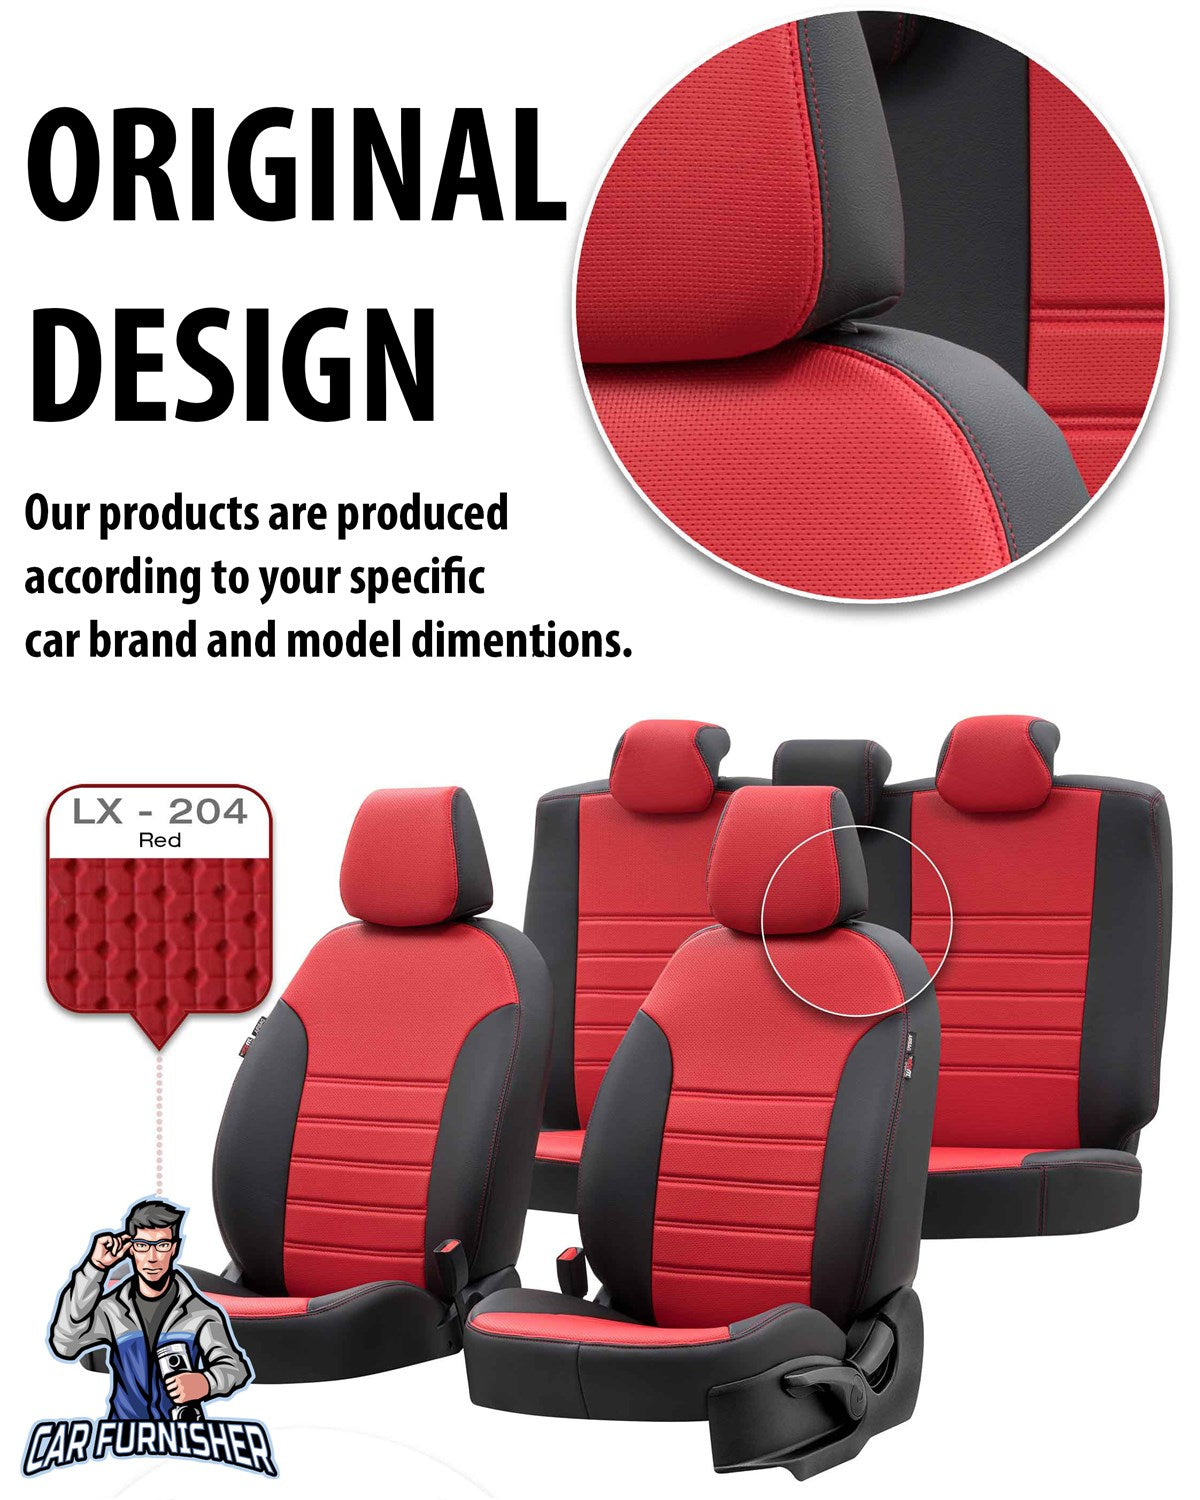 Toyota CHR Seat Cover New York Leather Design Smoked Leather